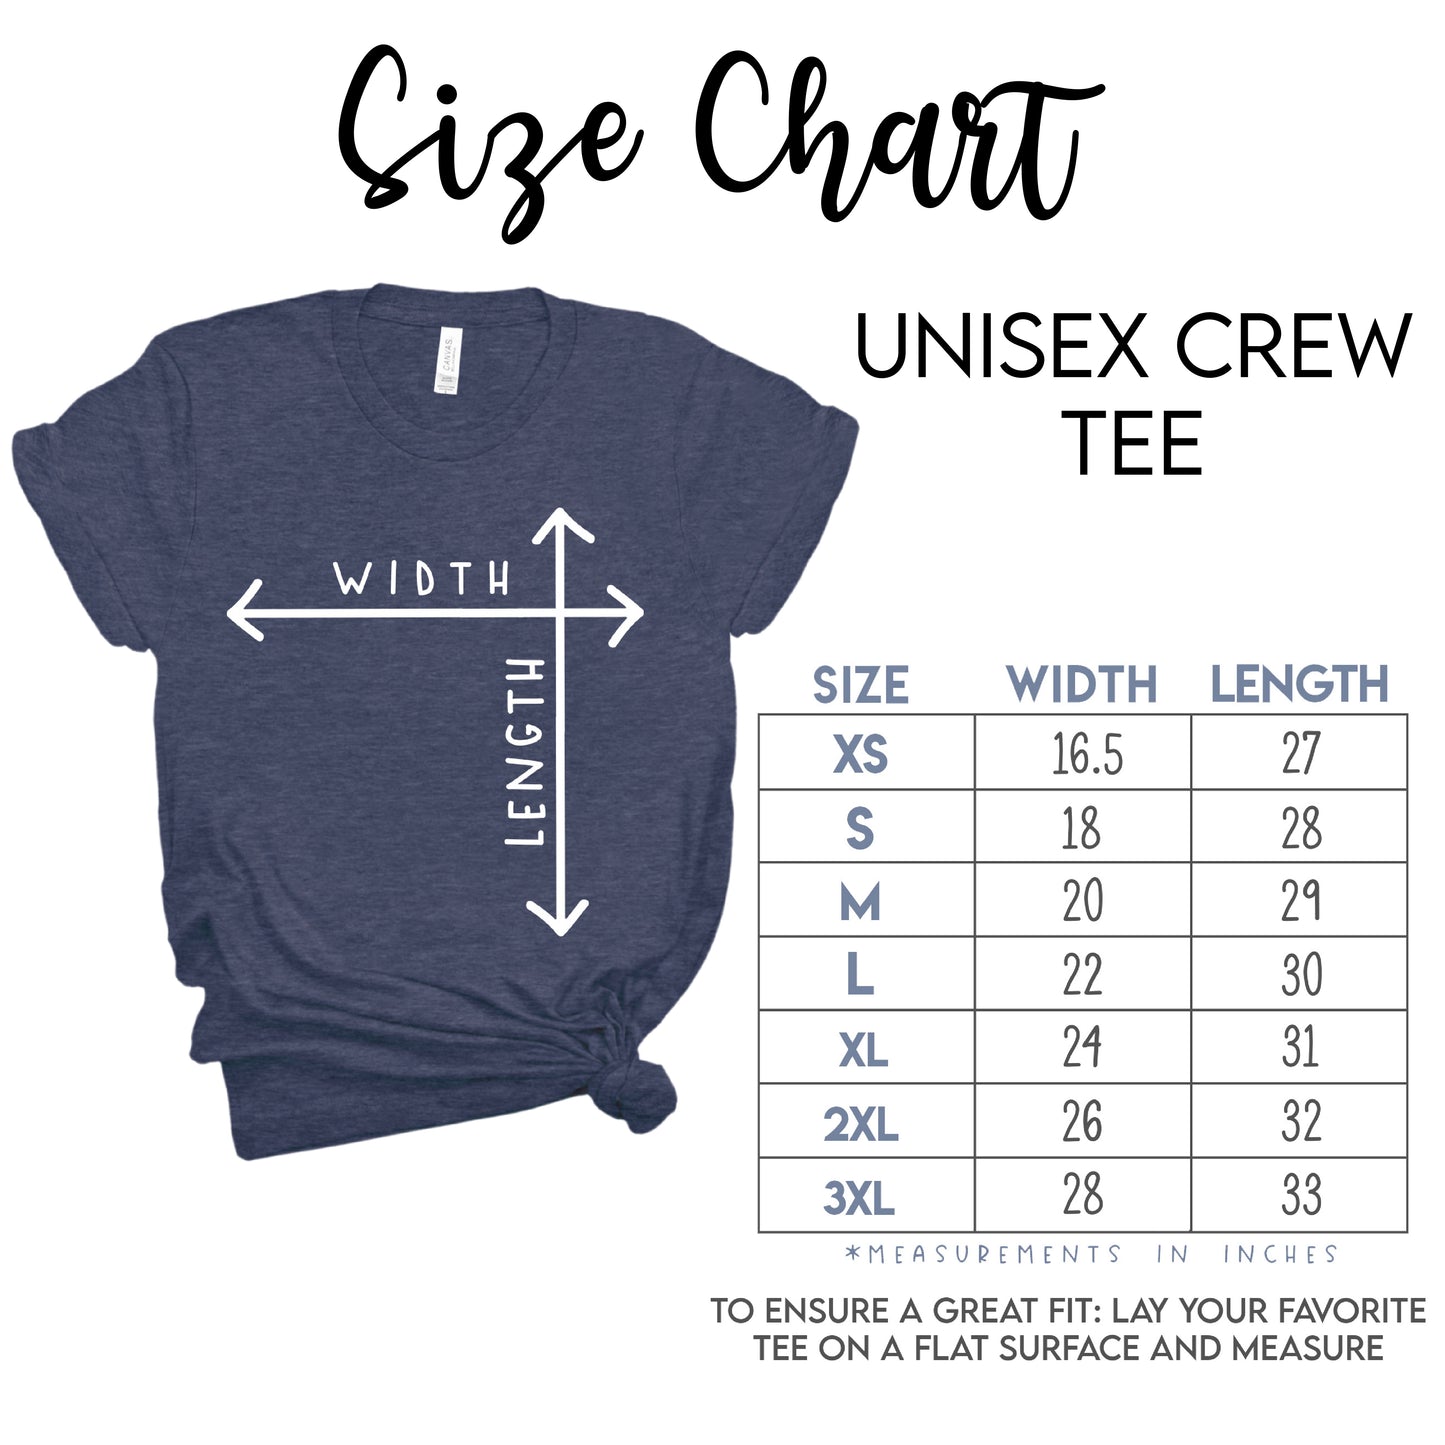 the size chart for a t - shirt with the measurements